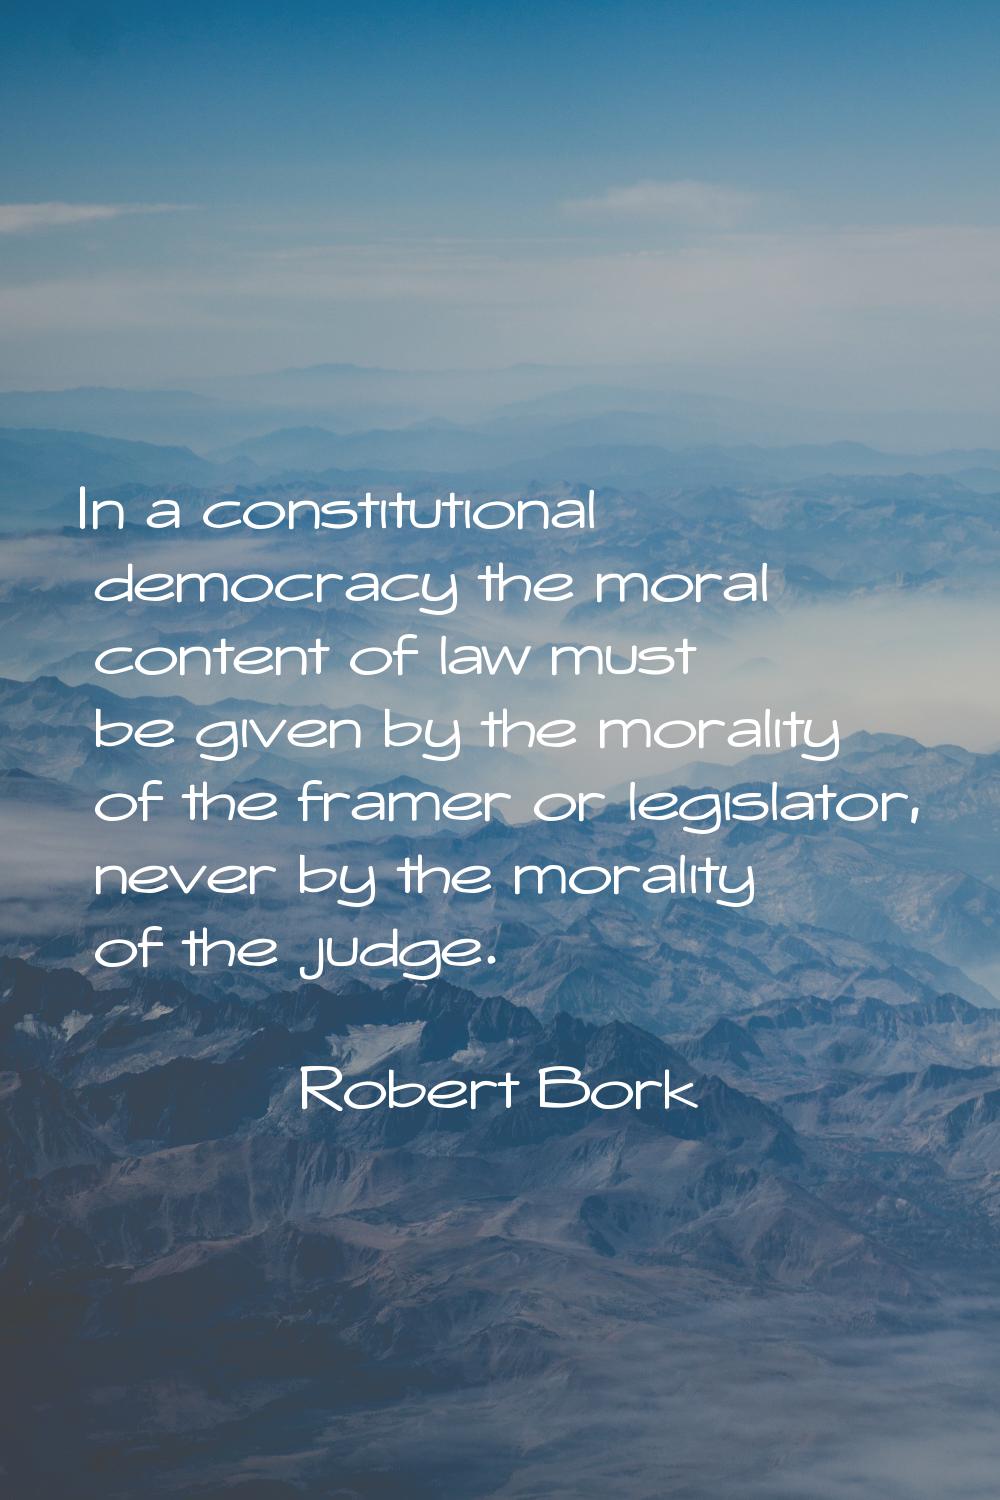 In a constitutional democracy the moral content of law must be given by the morality of the framer 